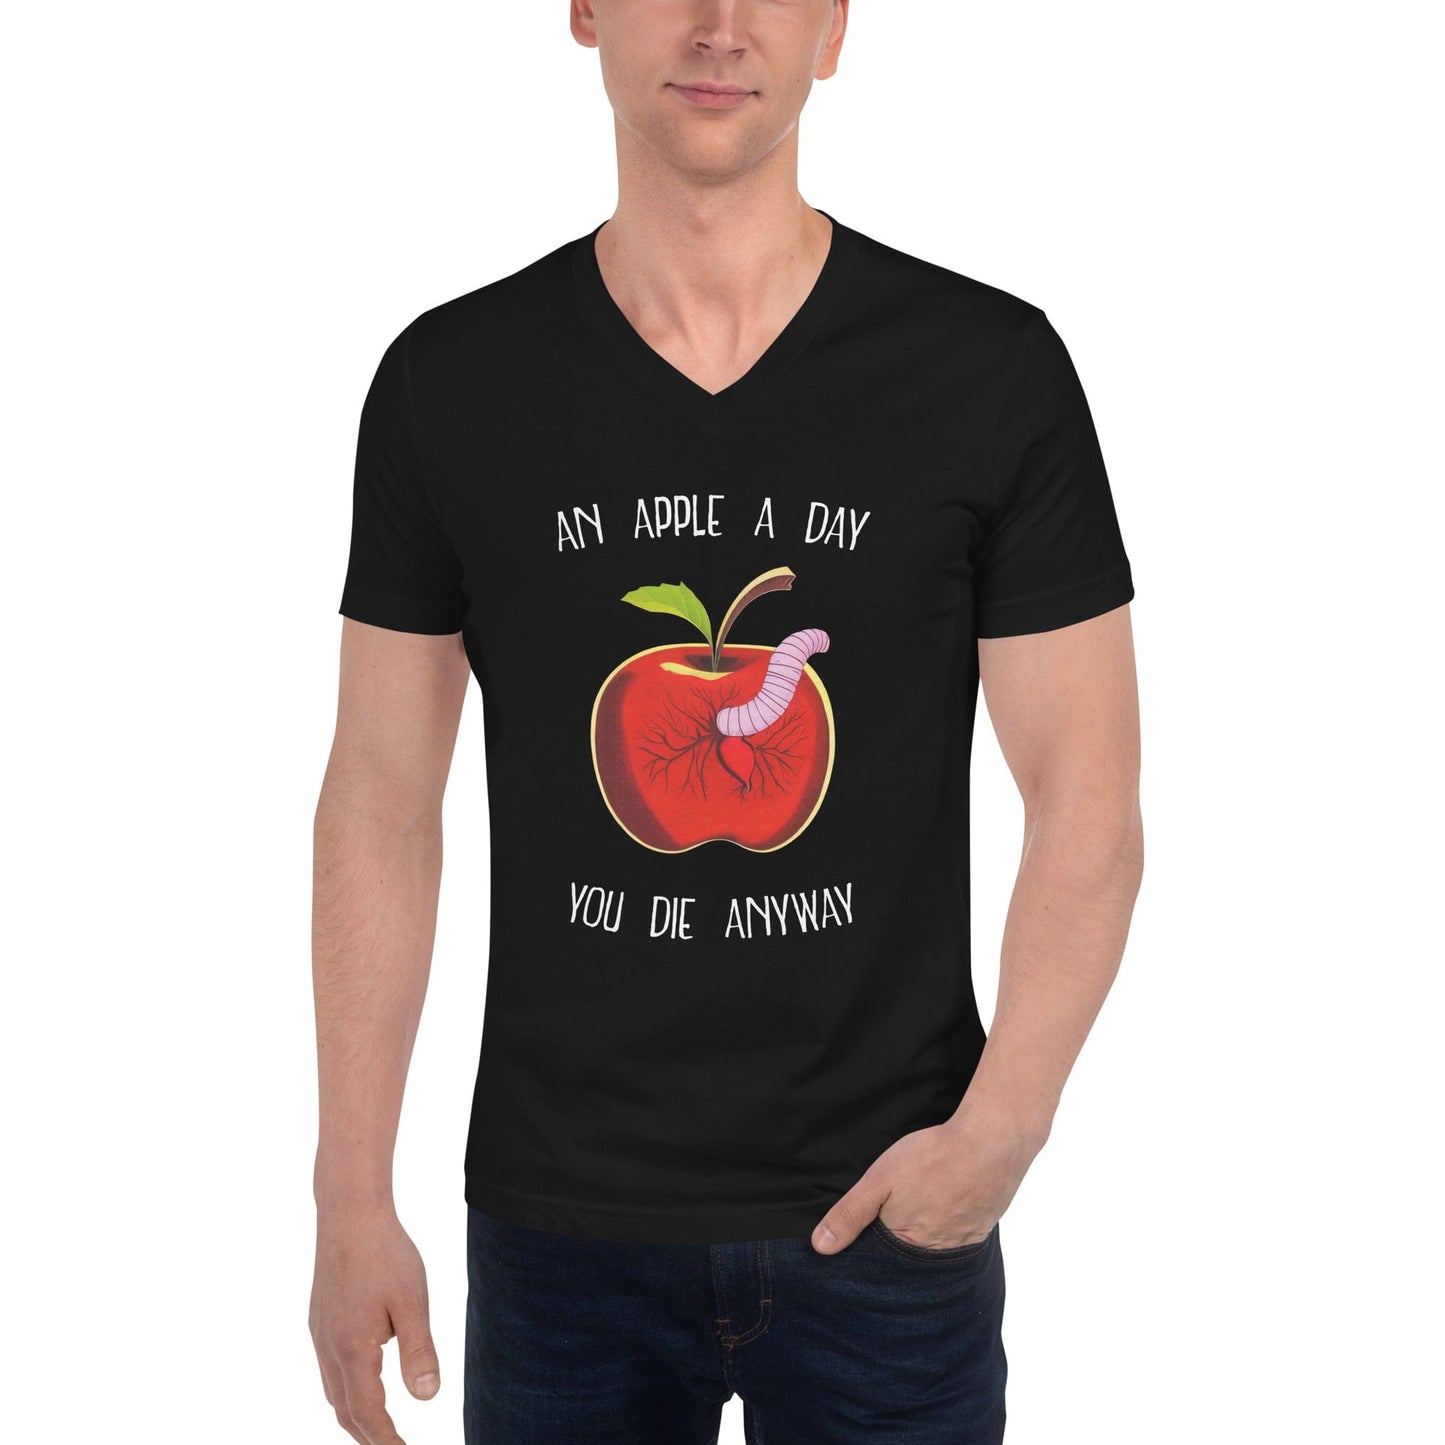 An Apple a day, you die anyway - Unisex V-Neck T-Shirt